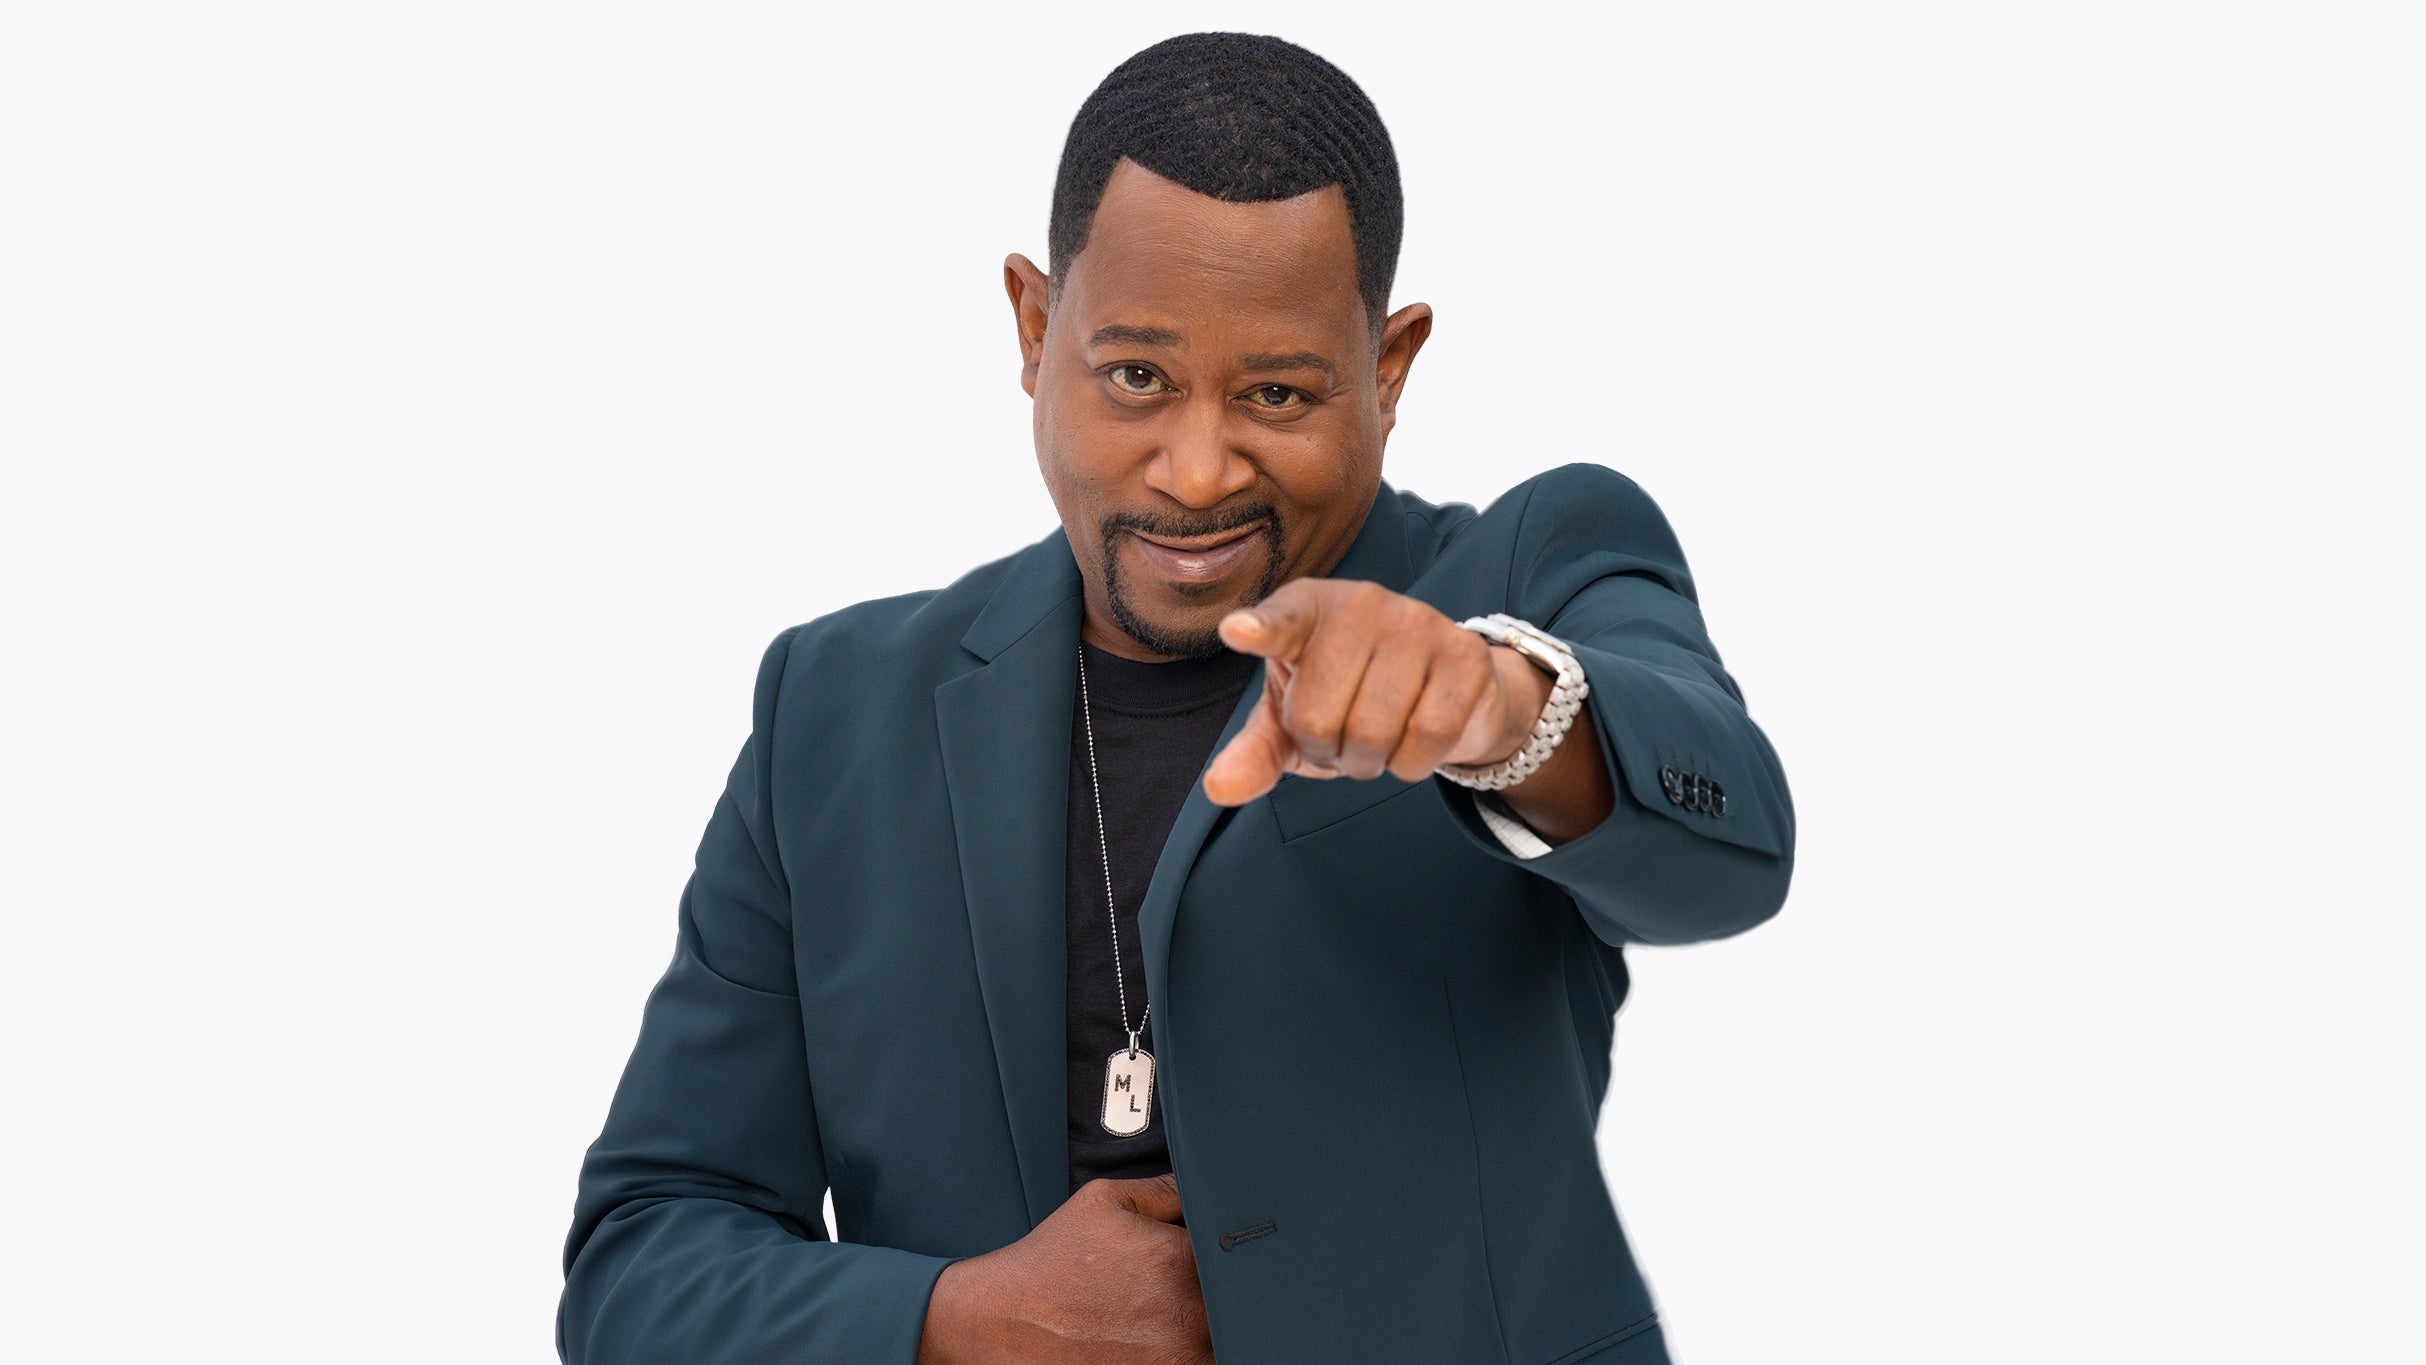 Martin Lawrence with special guest Jess Hilarious presale code for performance tickets in Chicago, IL (Credit Union 1 Arena at UIC)